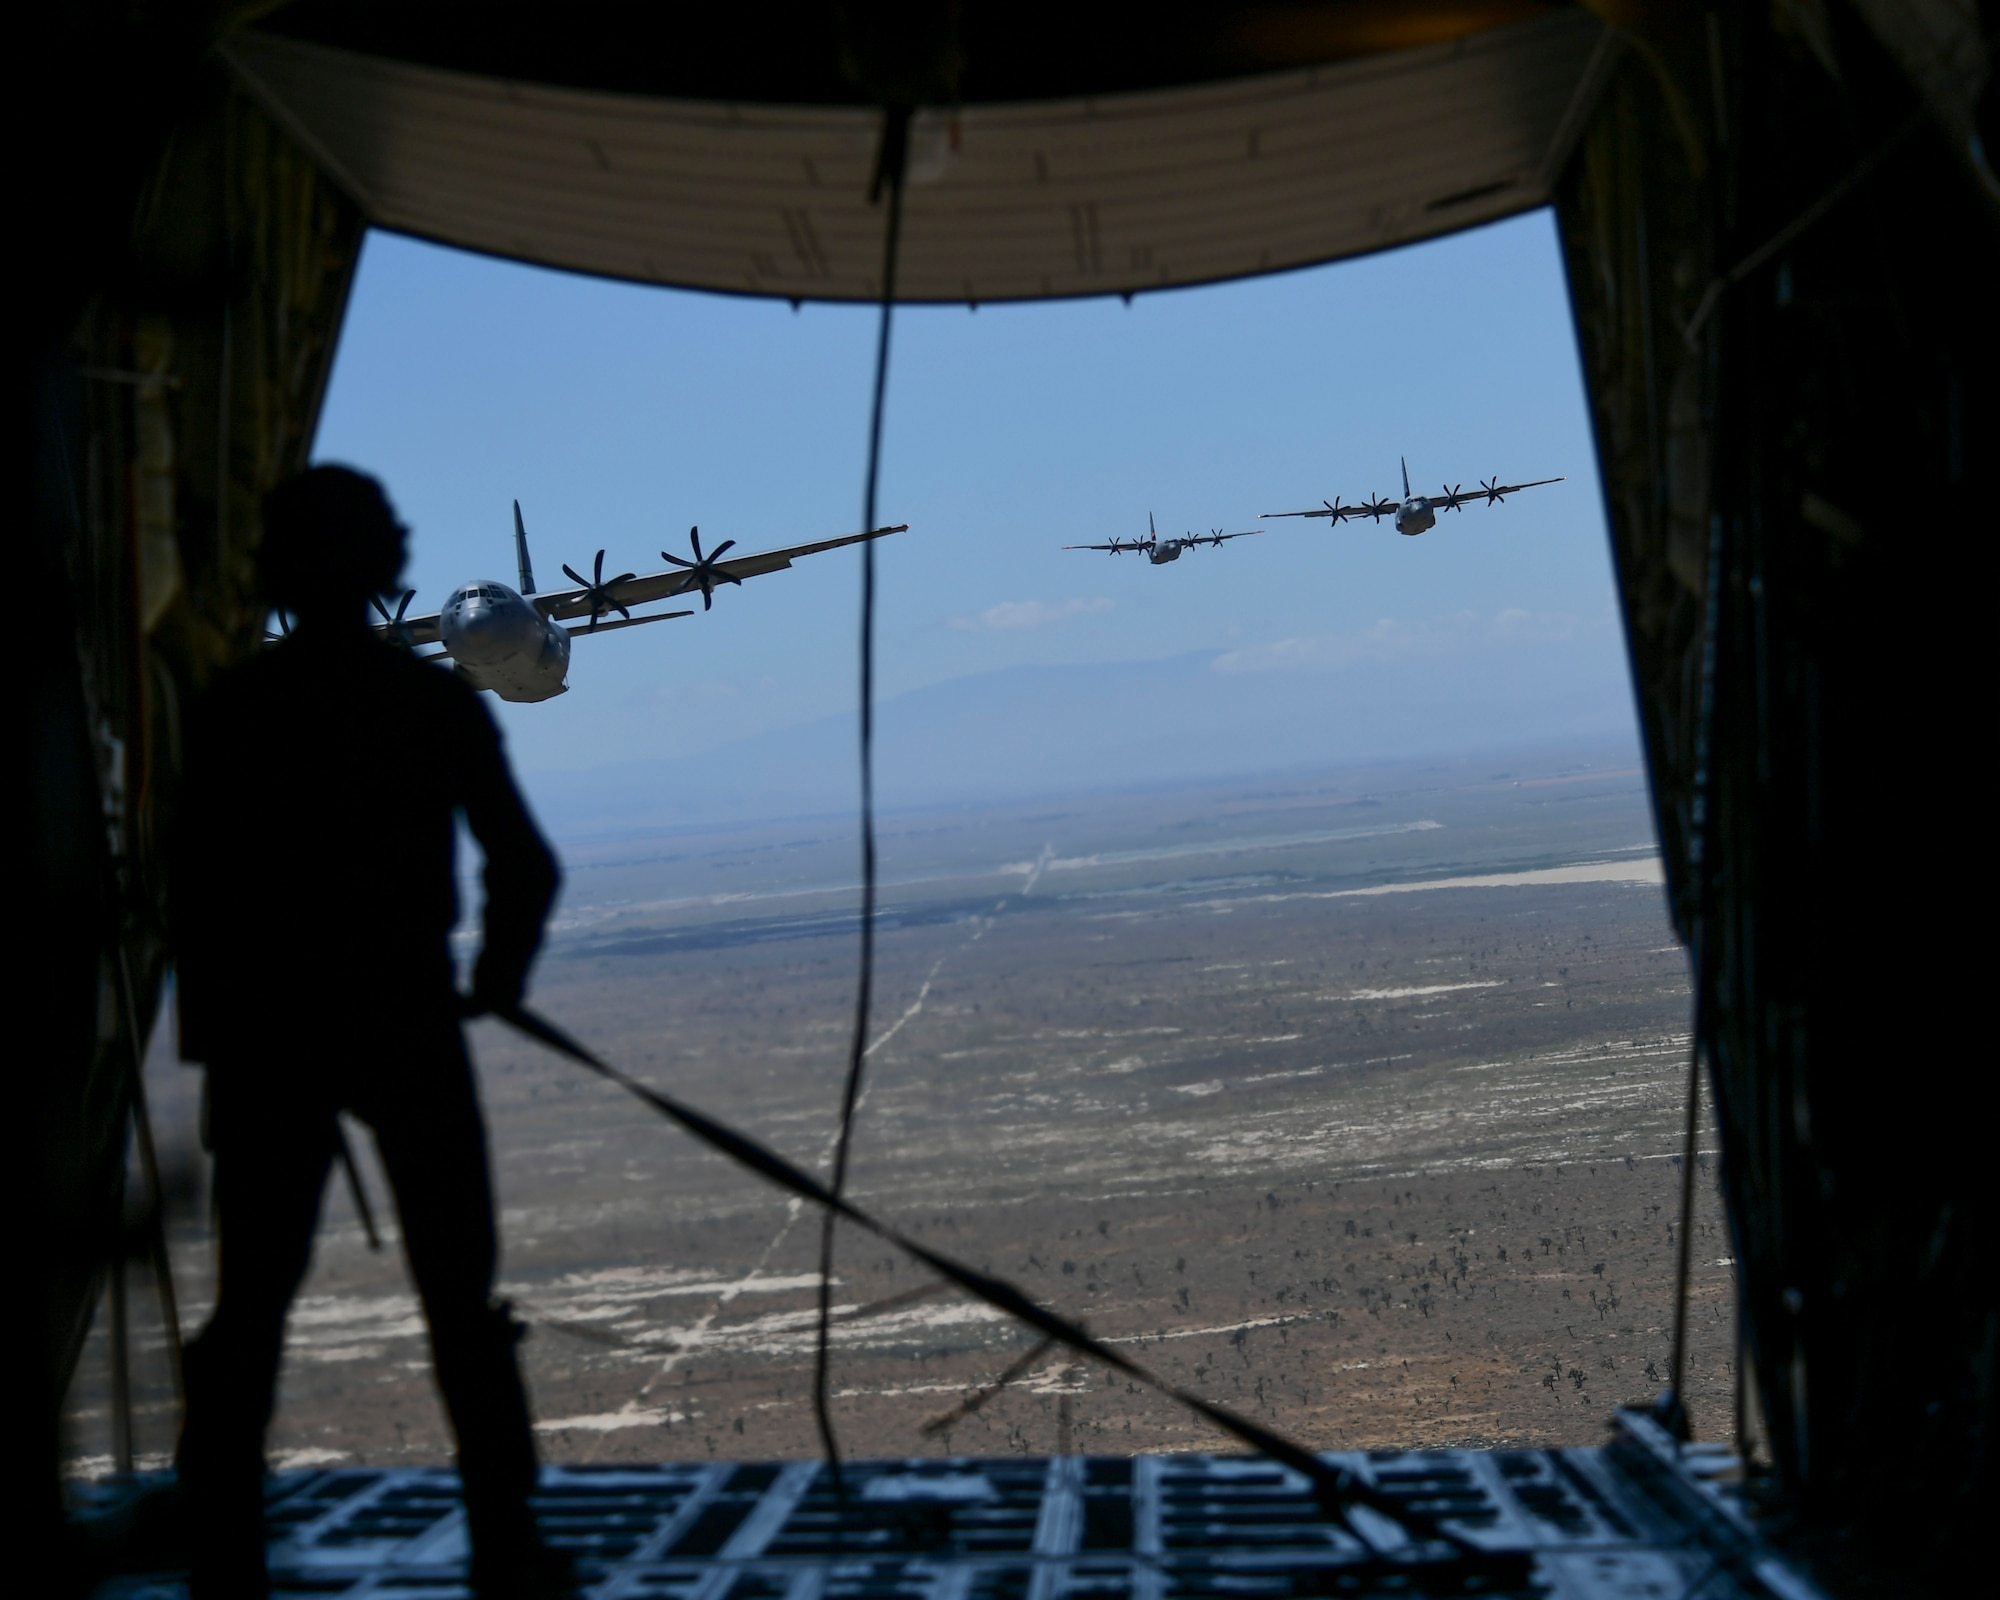 A California Air National Guard loadmaster is seen holding a tie down strap inside the back of a military California Air National Guard C-130J Super Hercules aircraft. In front of him the back of the aircraft's ramp is open to show three additional C-130J Super Hercules aircraft from the California Air National Guard following in close pursuit at a lower altitude above a drop zone in the Palmdale desert.